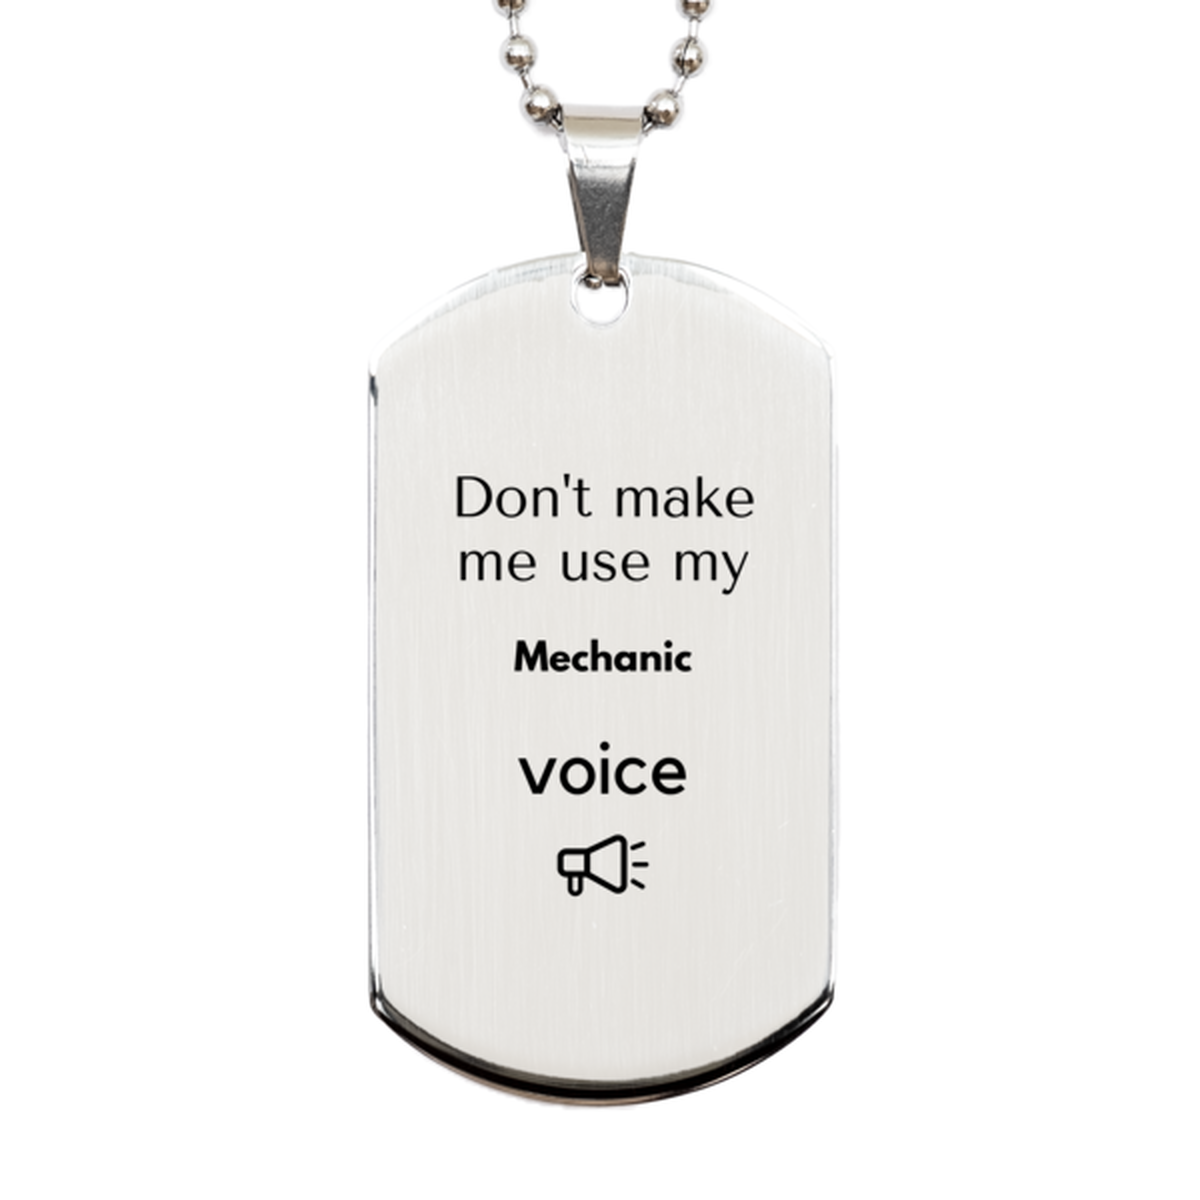 Don't make me use my Mechanic voice, Sarcasm Mechanic Gifts, Christmas Mechanic Silver Dog Tag Birthday Unique Gifts For Mechanic Coworkers, Men, Women, Colleague, Friends